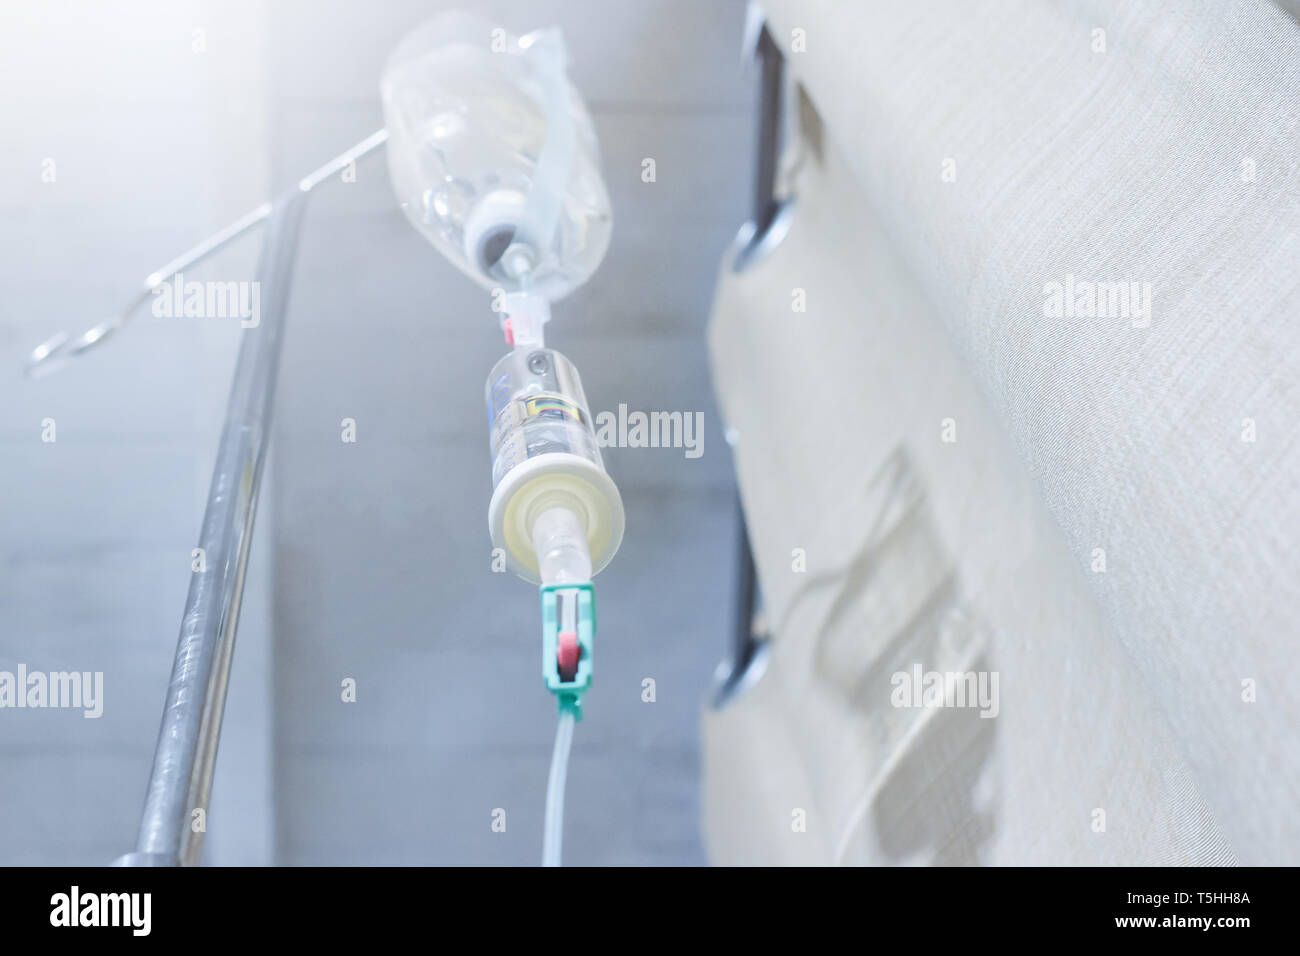 iv solution infusion, bottom view of saline bottle from the eyes of the patient on bed in the patient room Stock Photo